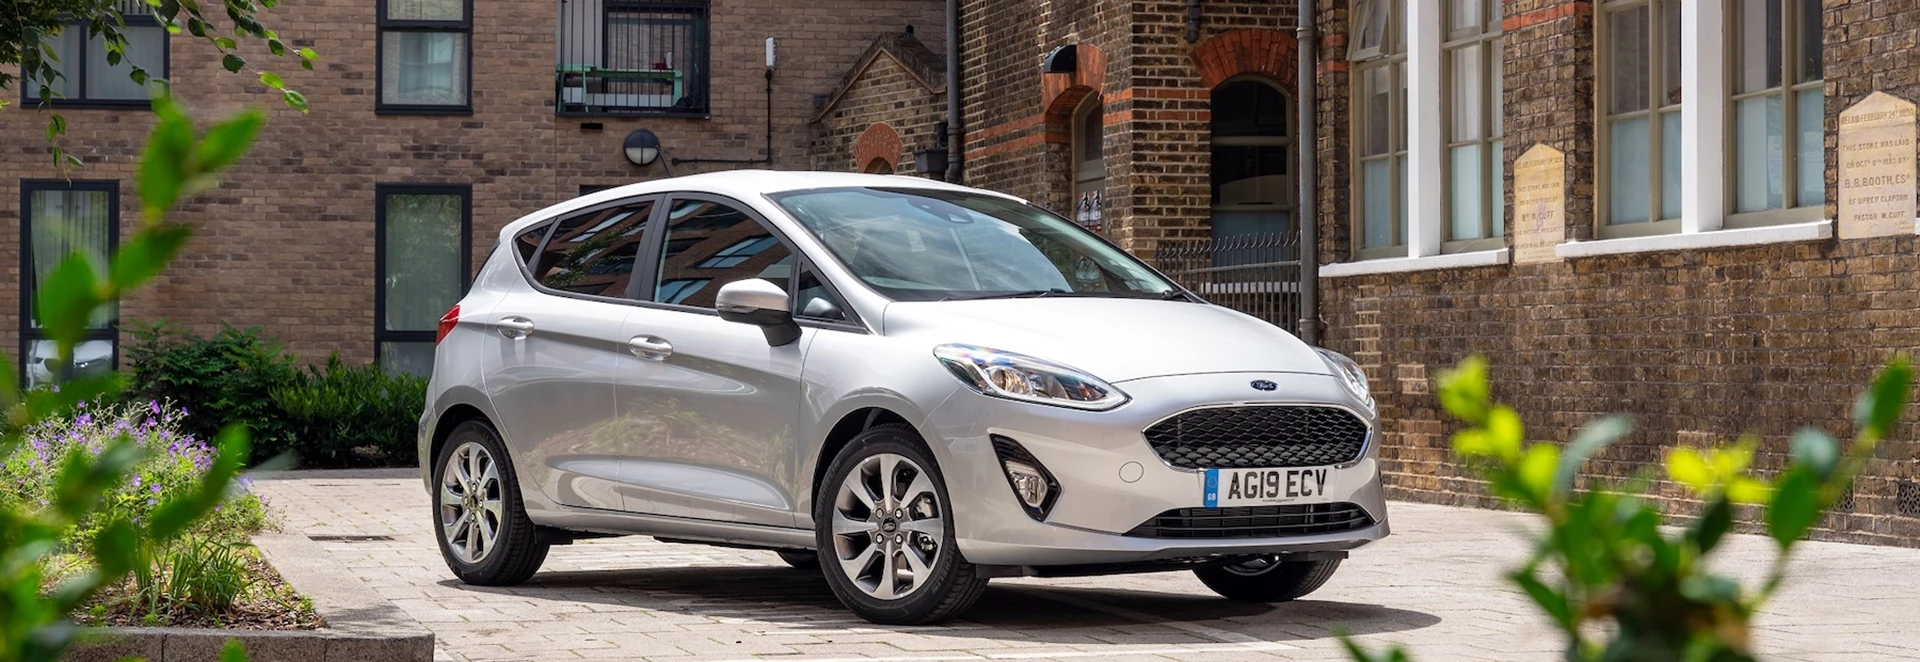 Ford Fiesta review: can new version remain Britain's favourite car?